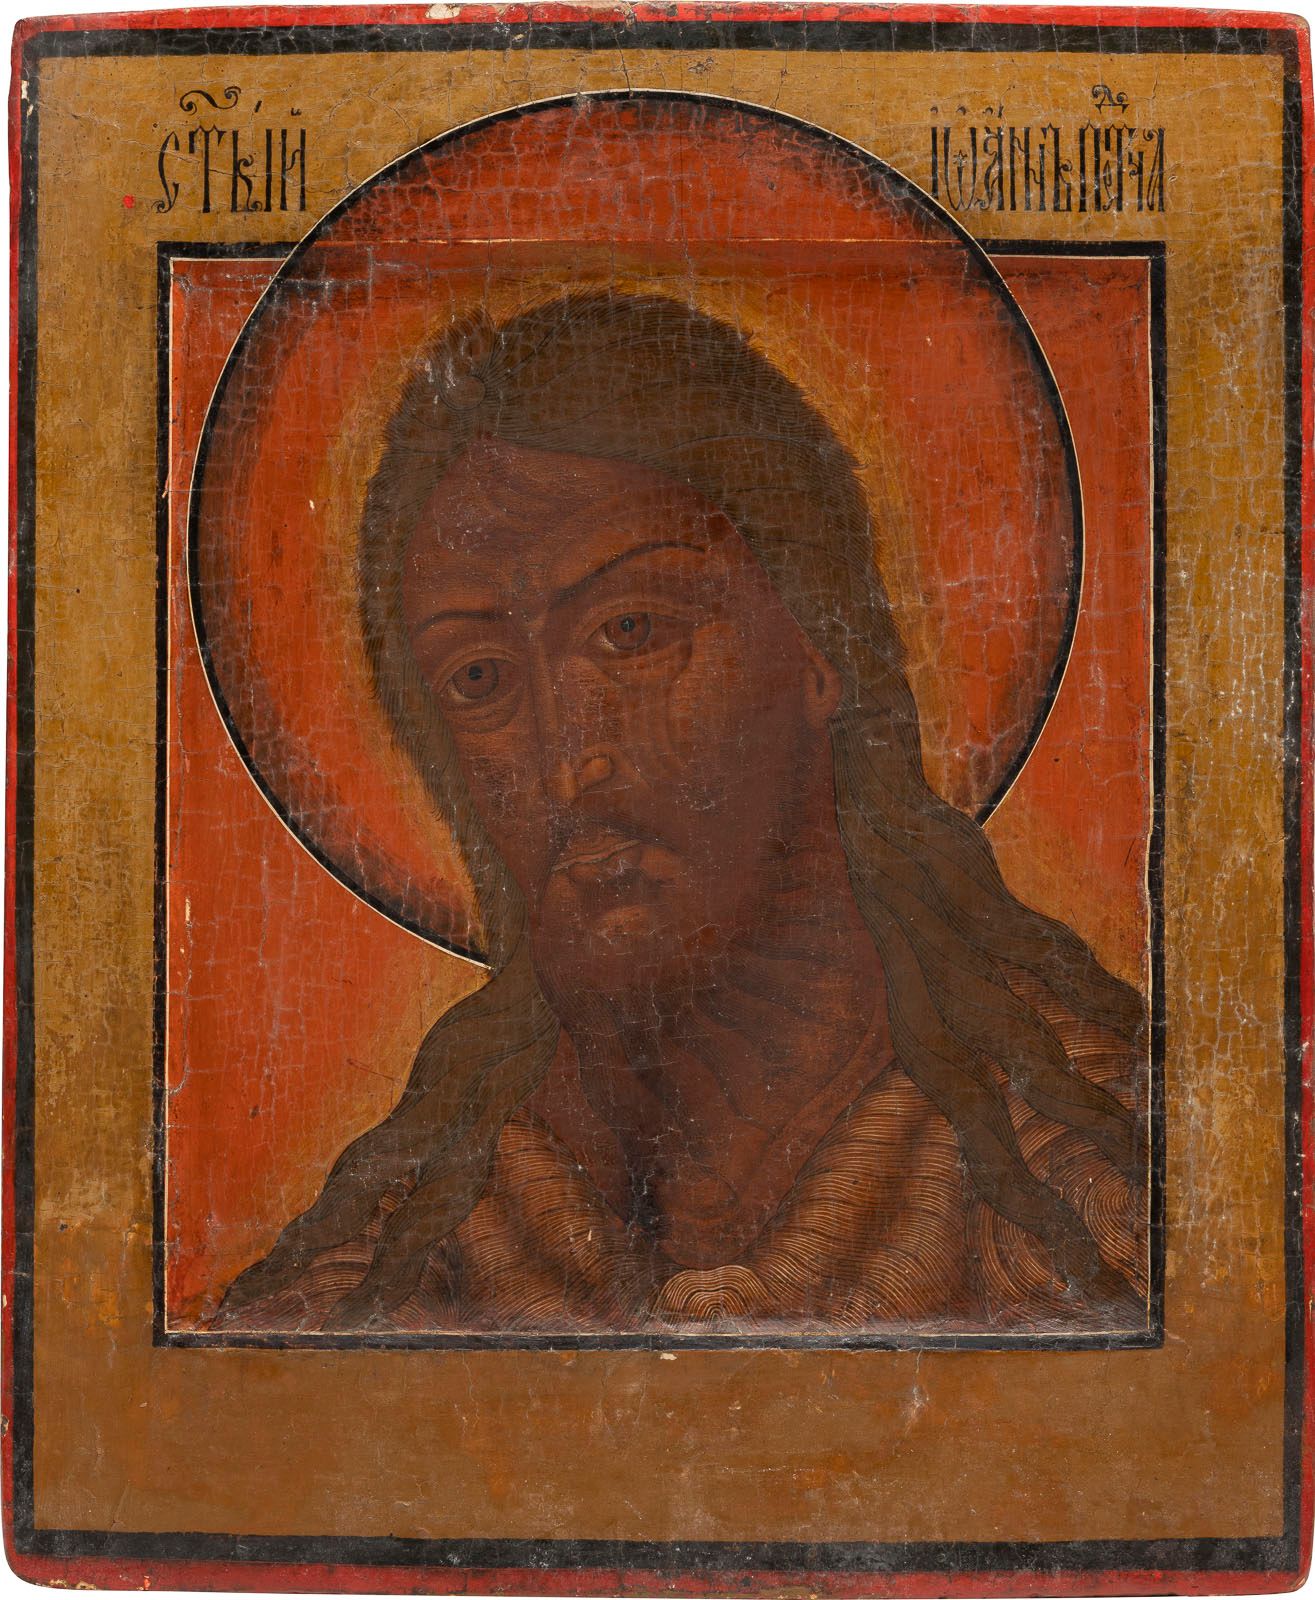 A FINE ICON SHOWING ST. JOHN THE FORERUNNER FROM A DEISIS UN FINO ICONO QUE MUES&hellip;